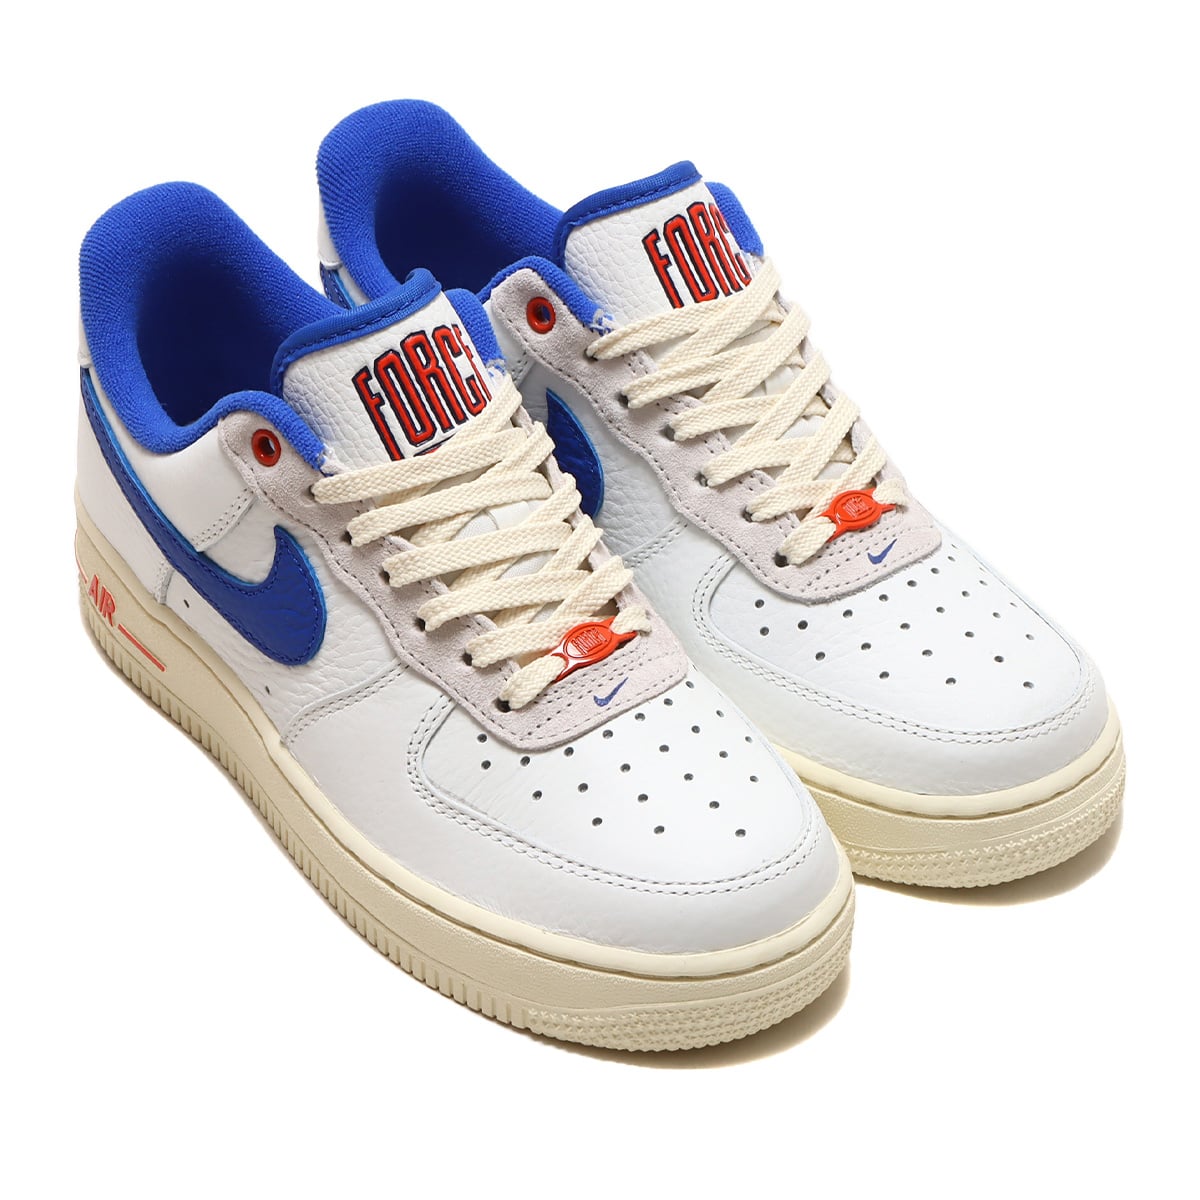 NIKE WMNS AIR FORCE '07 LX SUMMIT WHITE/HYPER ROYAL-PICANTE RED 23SP-I